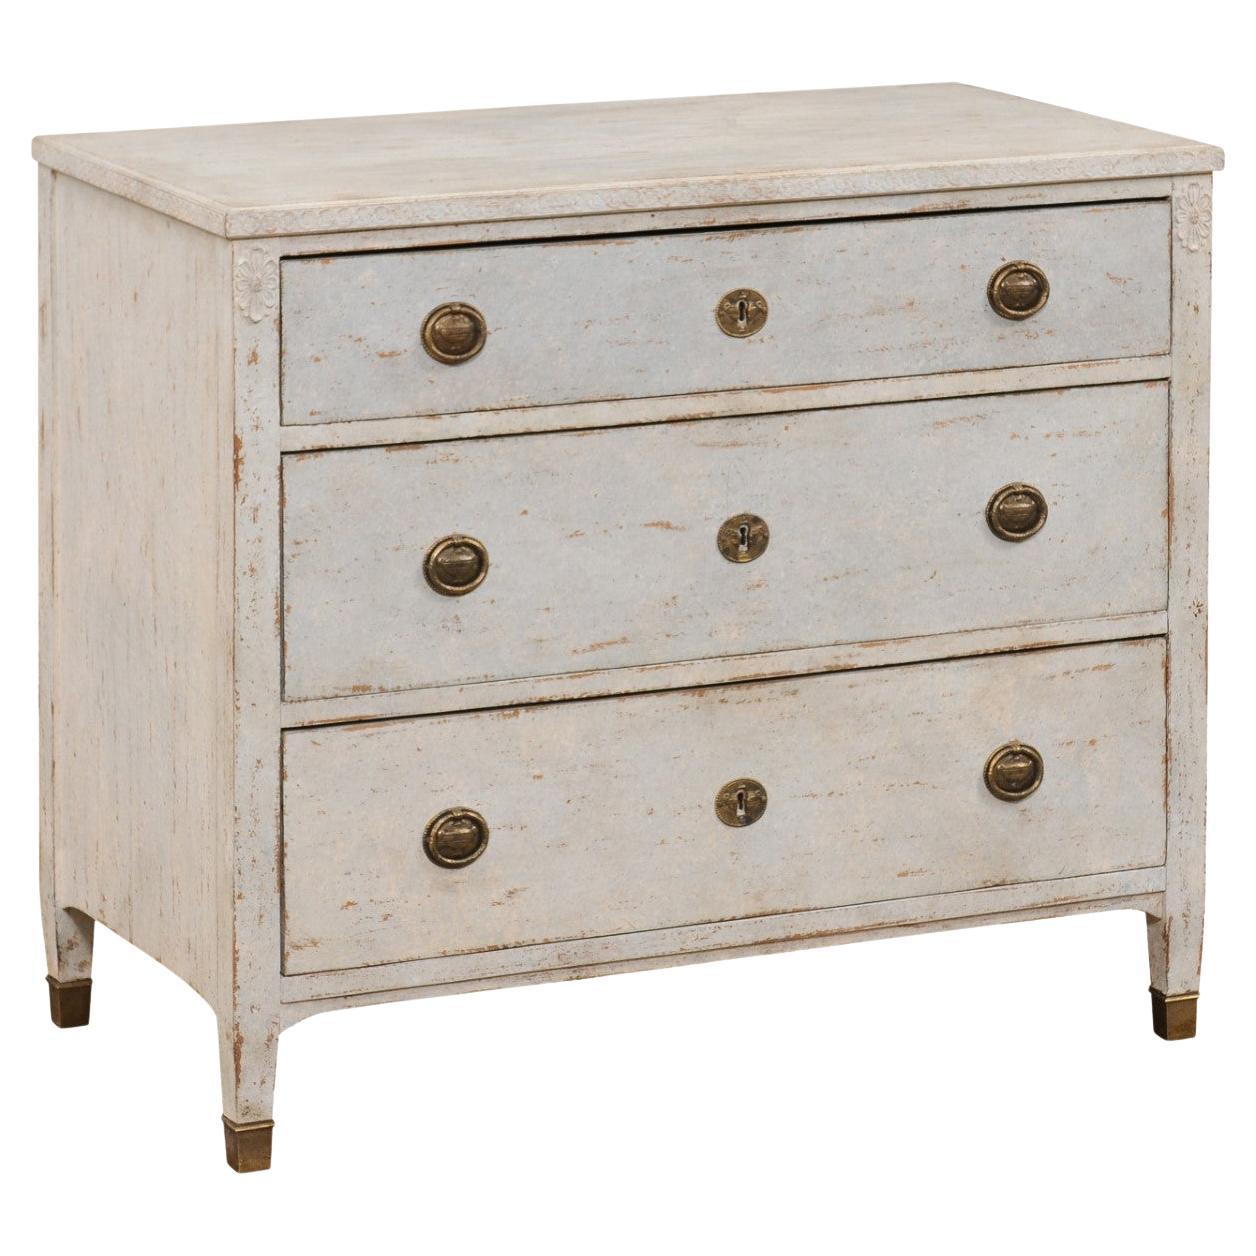 Swedish Gustavian Style 1880s Painted Three-Drawer Chest with Distressed Patina